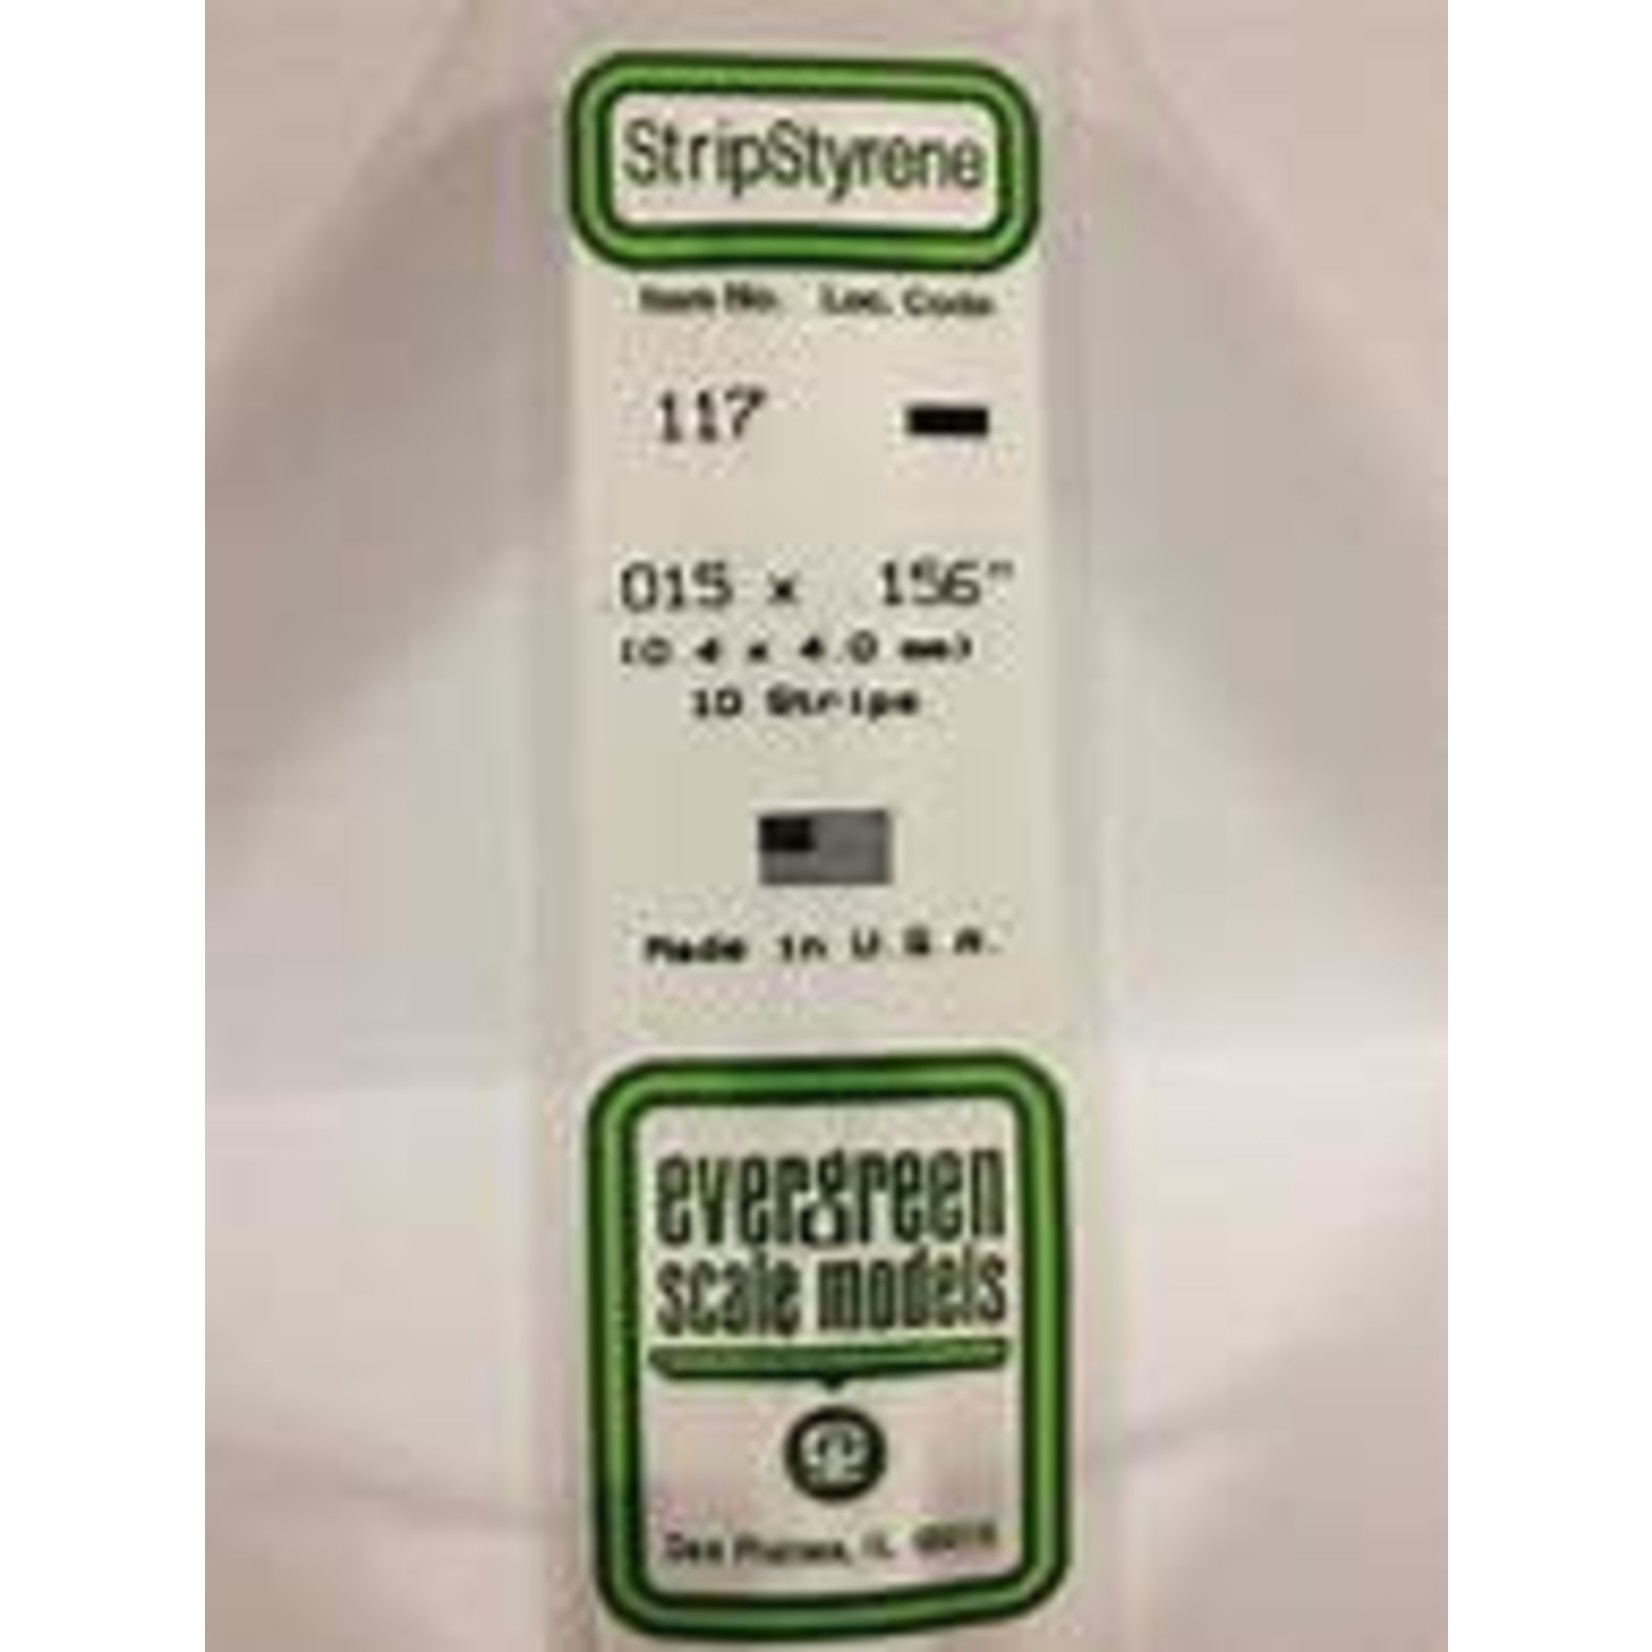 Evergreen Scale Models Evergreen 117 - .015" X .156" OPAQUE WHITE POLYSTYRENE STRIP #117